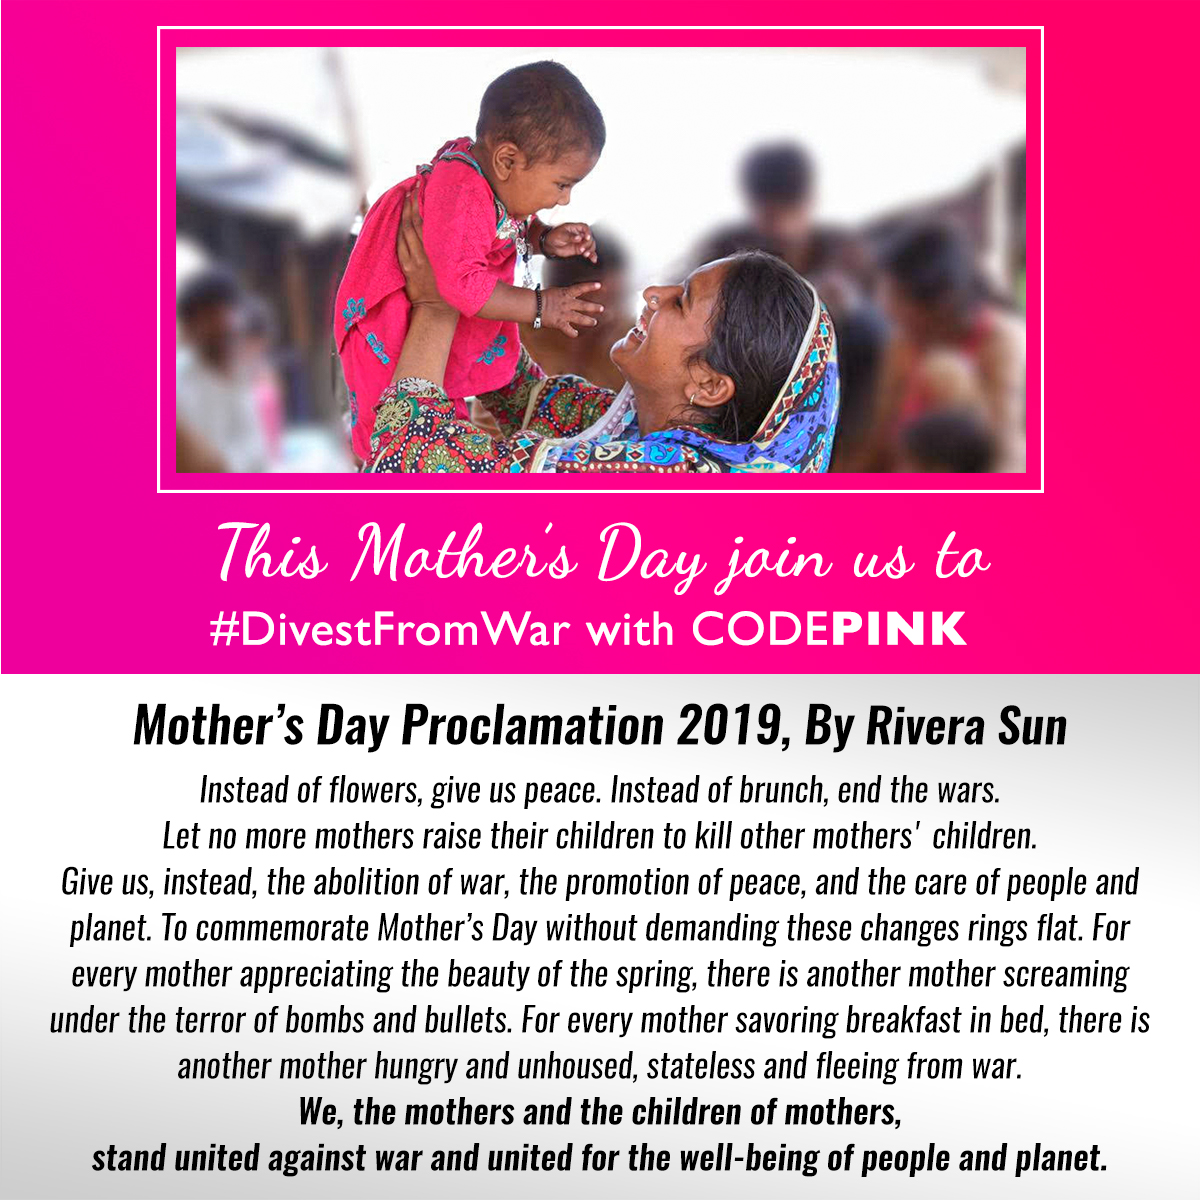 Mother's Day Proclamation by Rivera Sun 2019